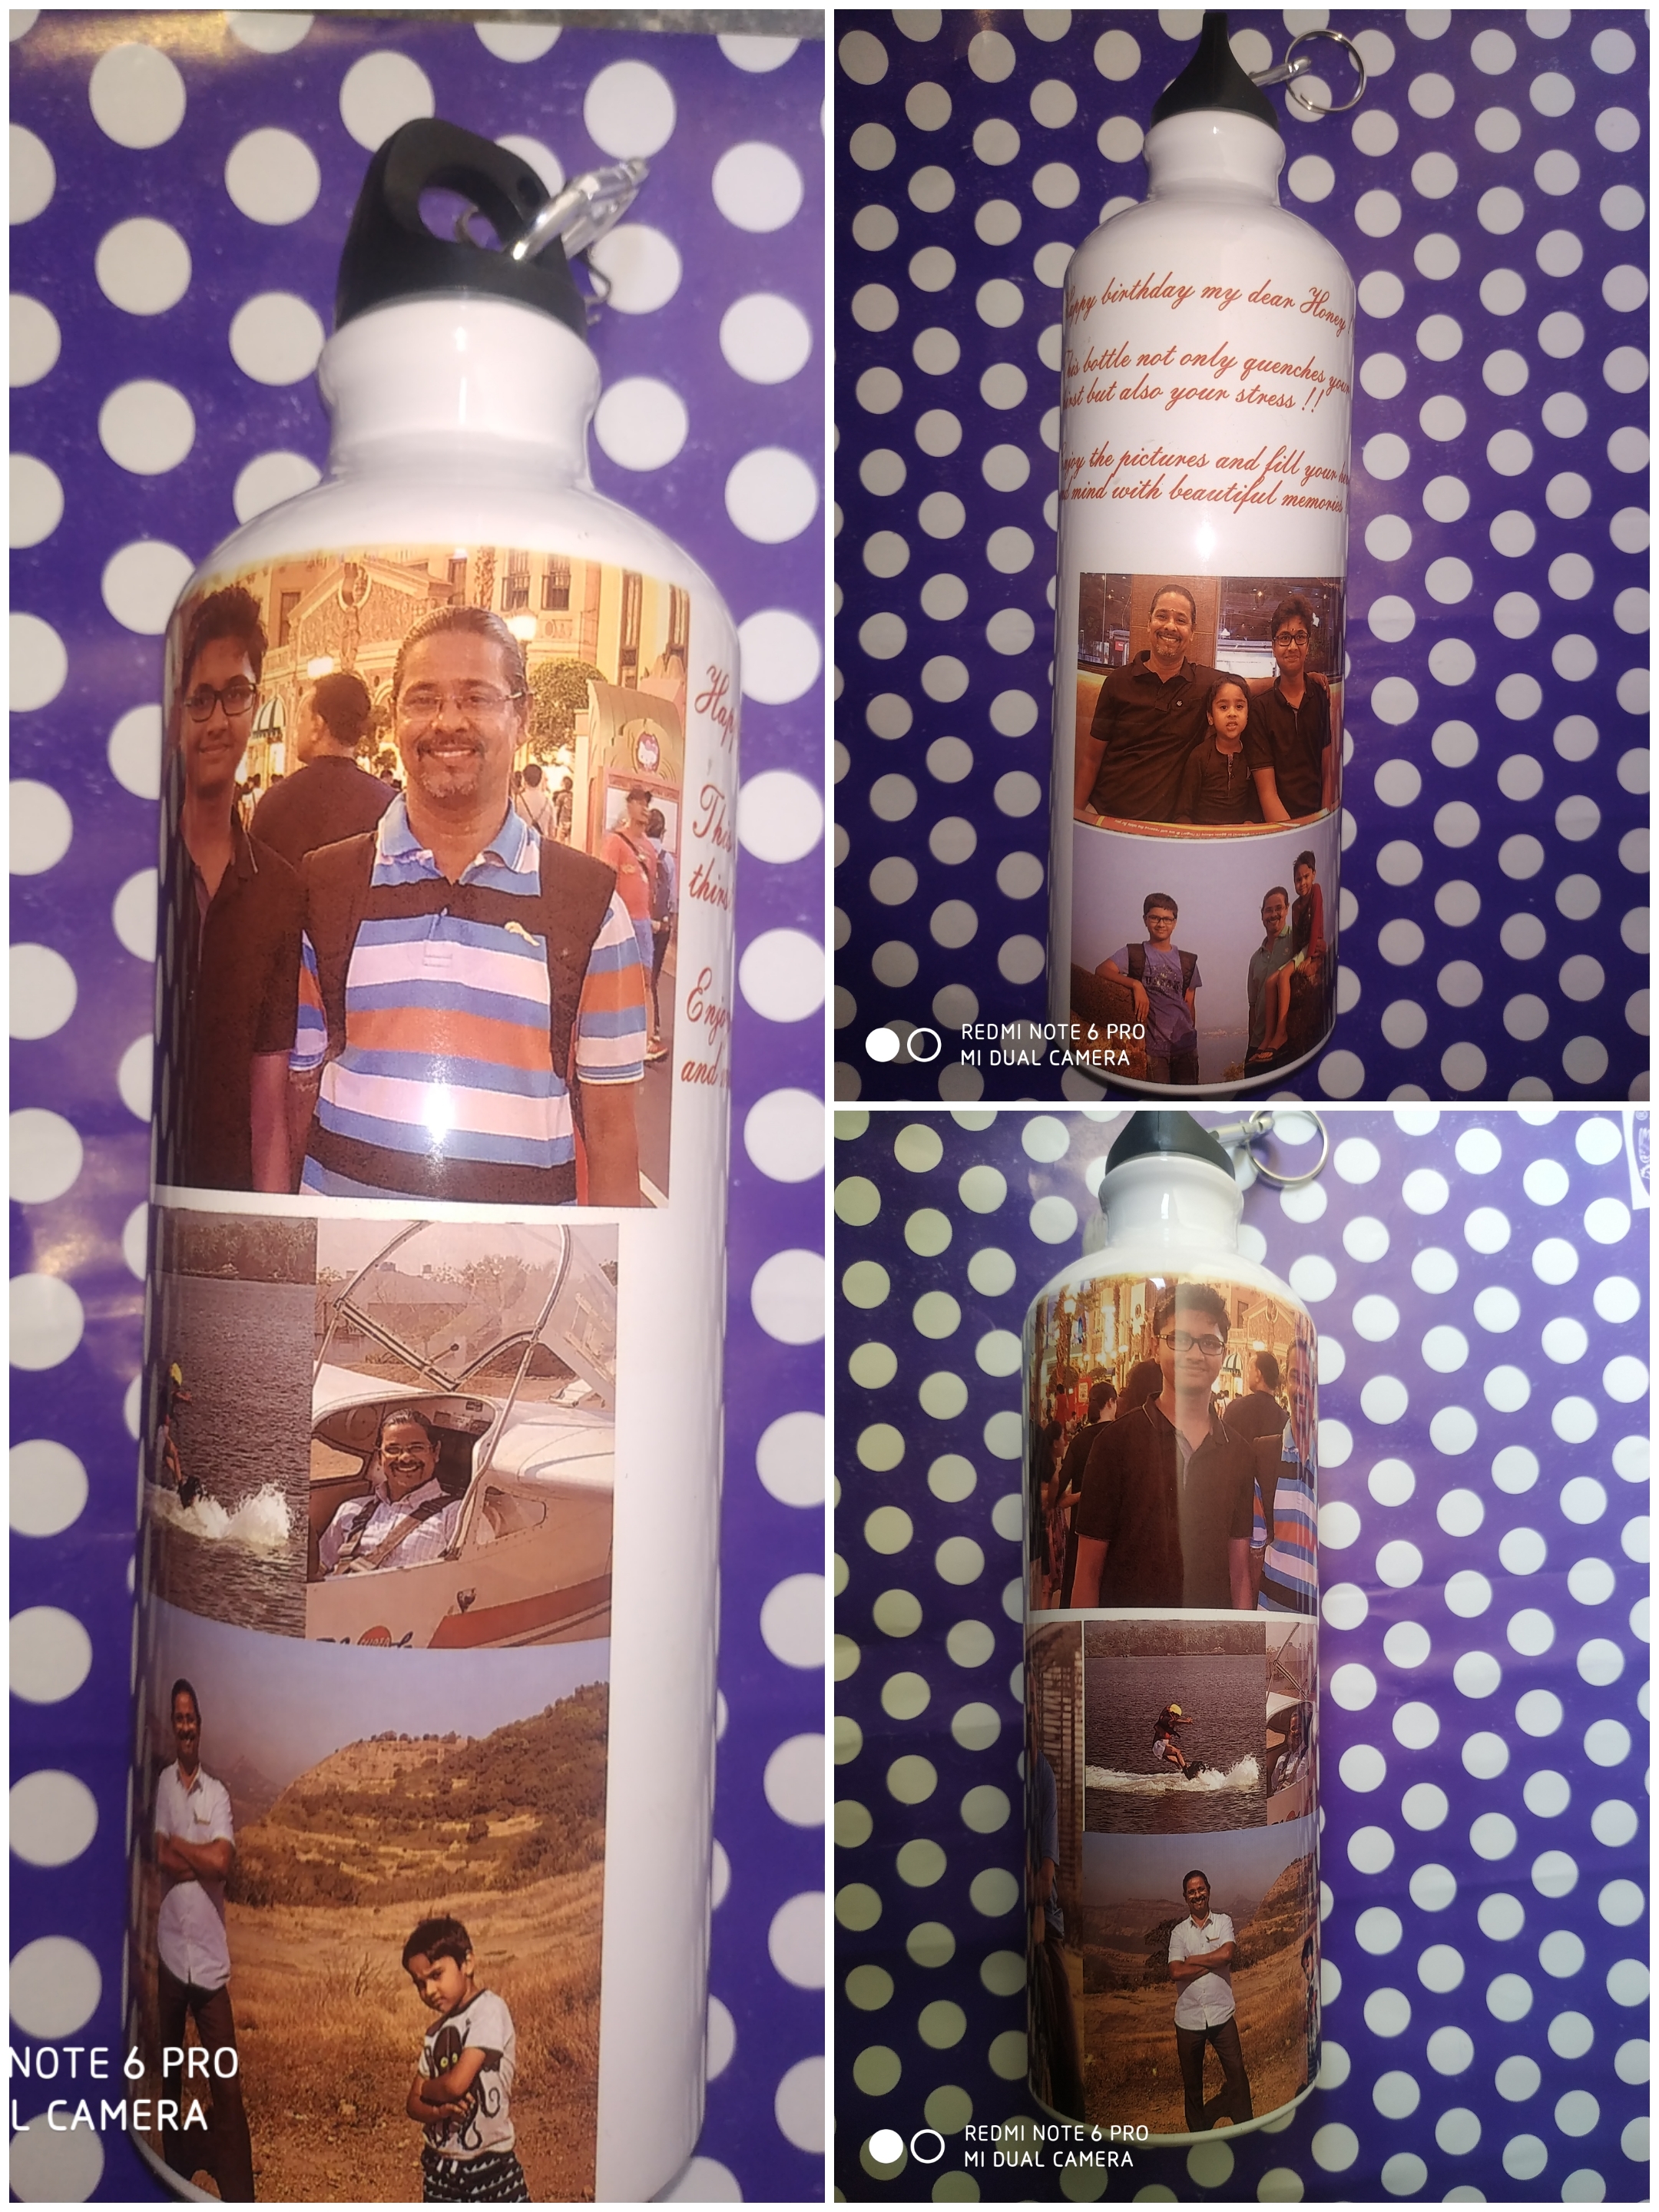 Customized Photo Printed Water Bottle